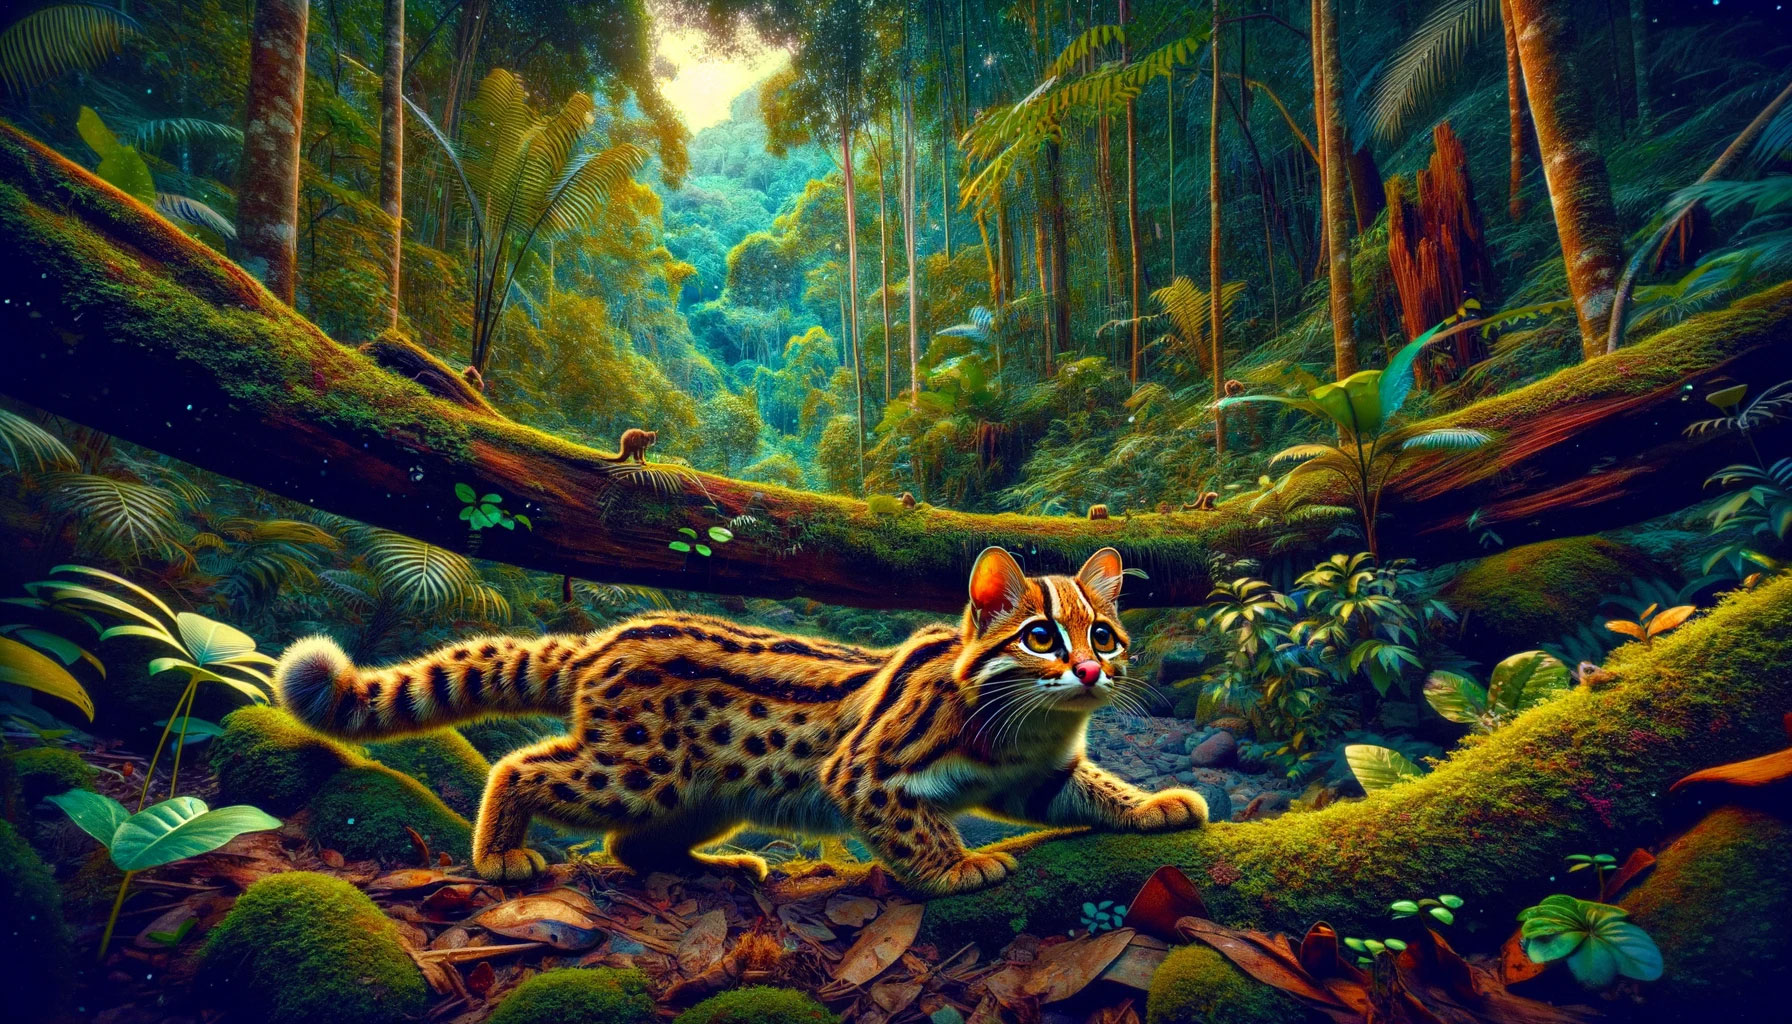 a-highly-realistic-lo-fi-style-image-depicting-the-habitat-and-behavior-of-the-rusty-spotted-cat-the-scene-is-set-in-a-vibrant-natural-forest